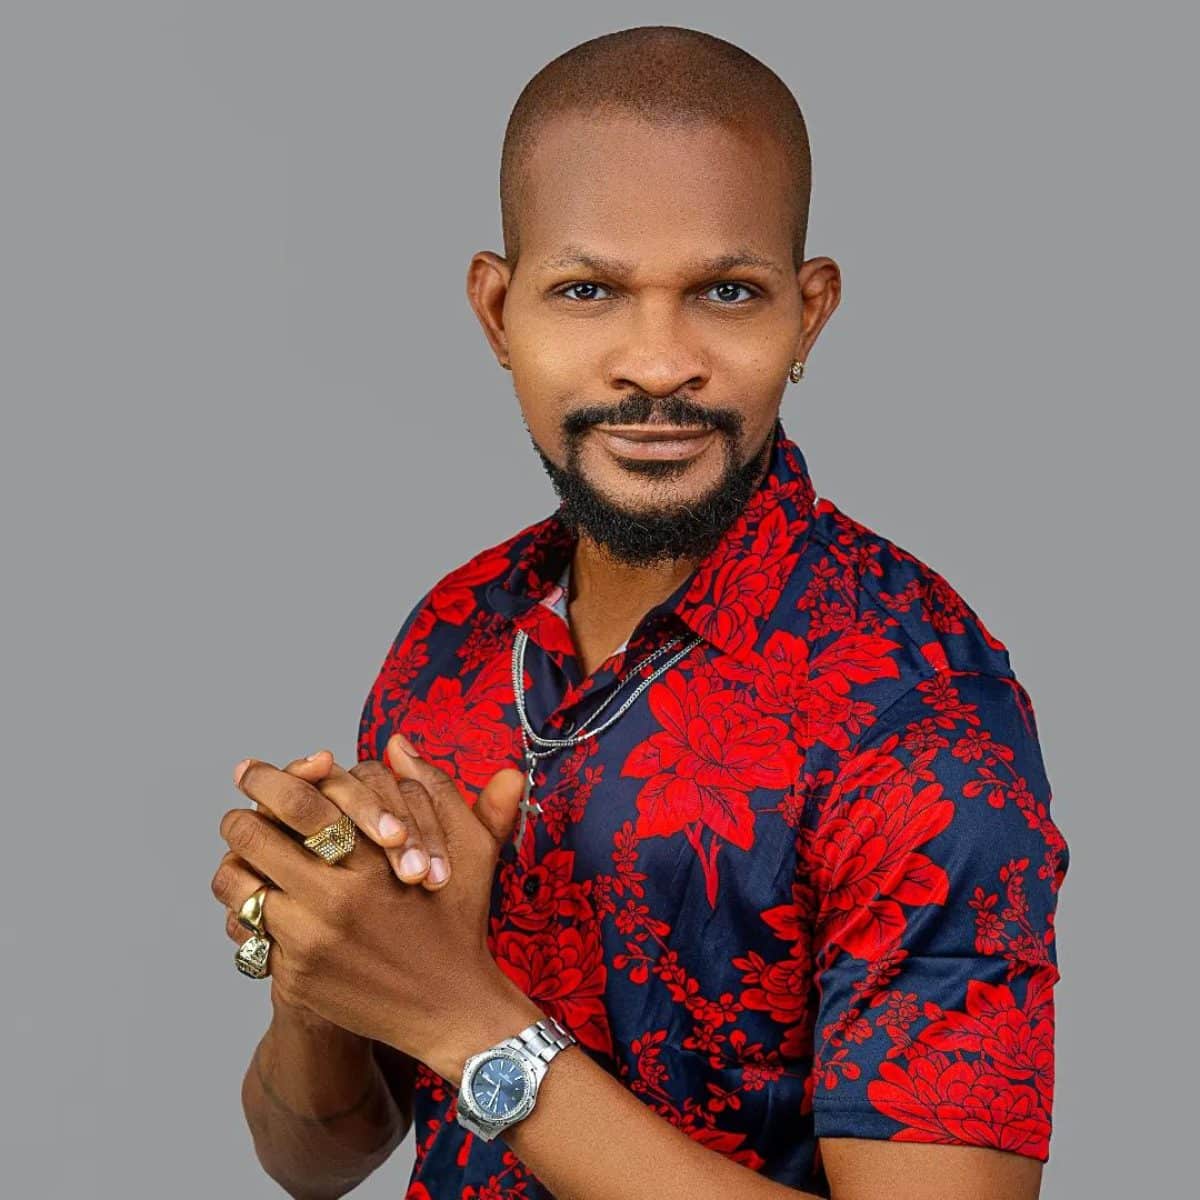 "You should be ashamed of yourself" - Uche Maduagwu drags Don Jazzy for gushing over Pastor Yul and Judy Austin's video